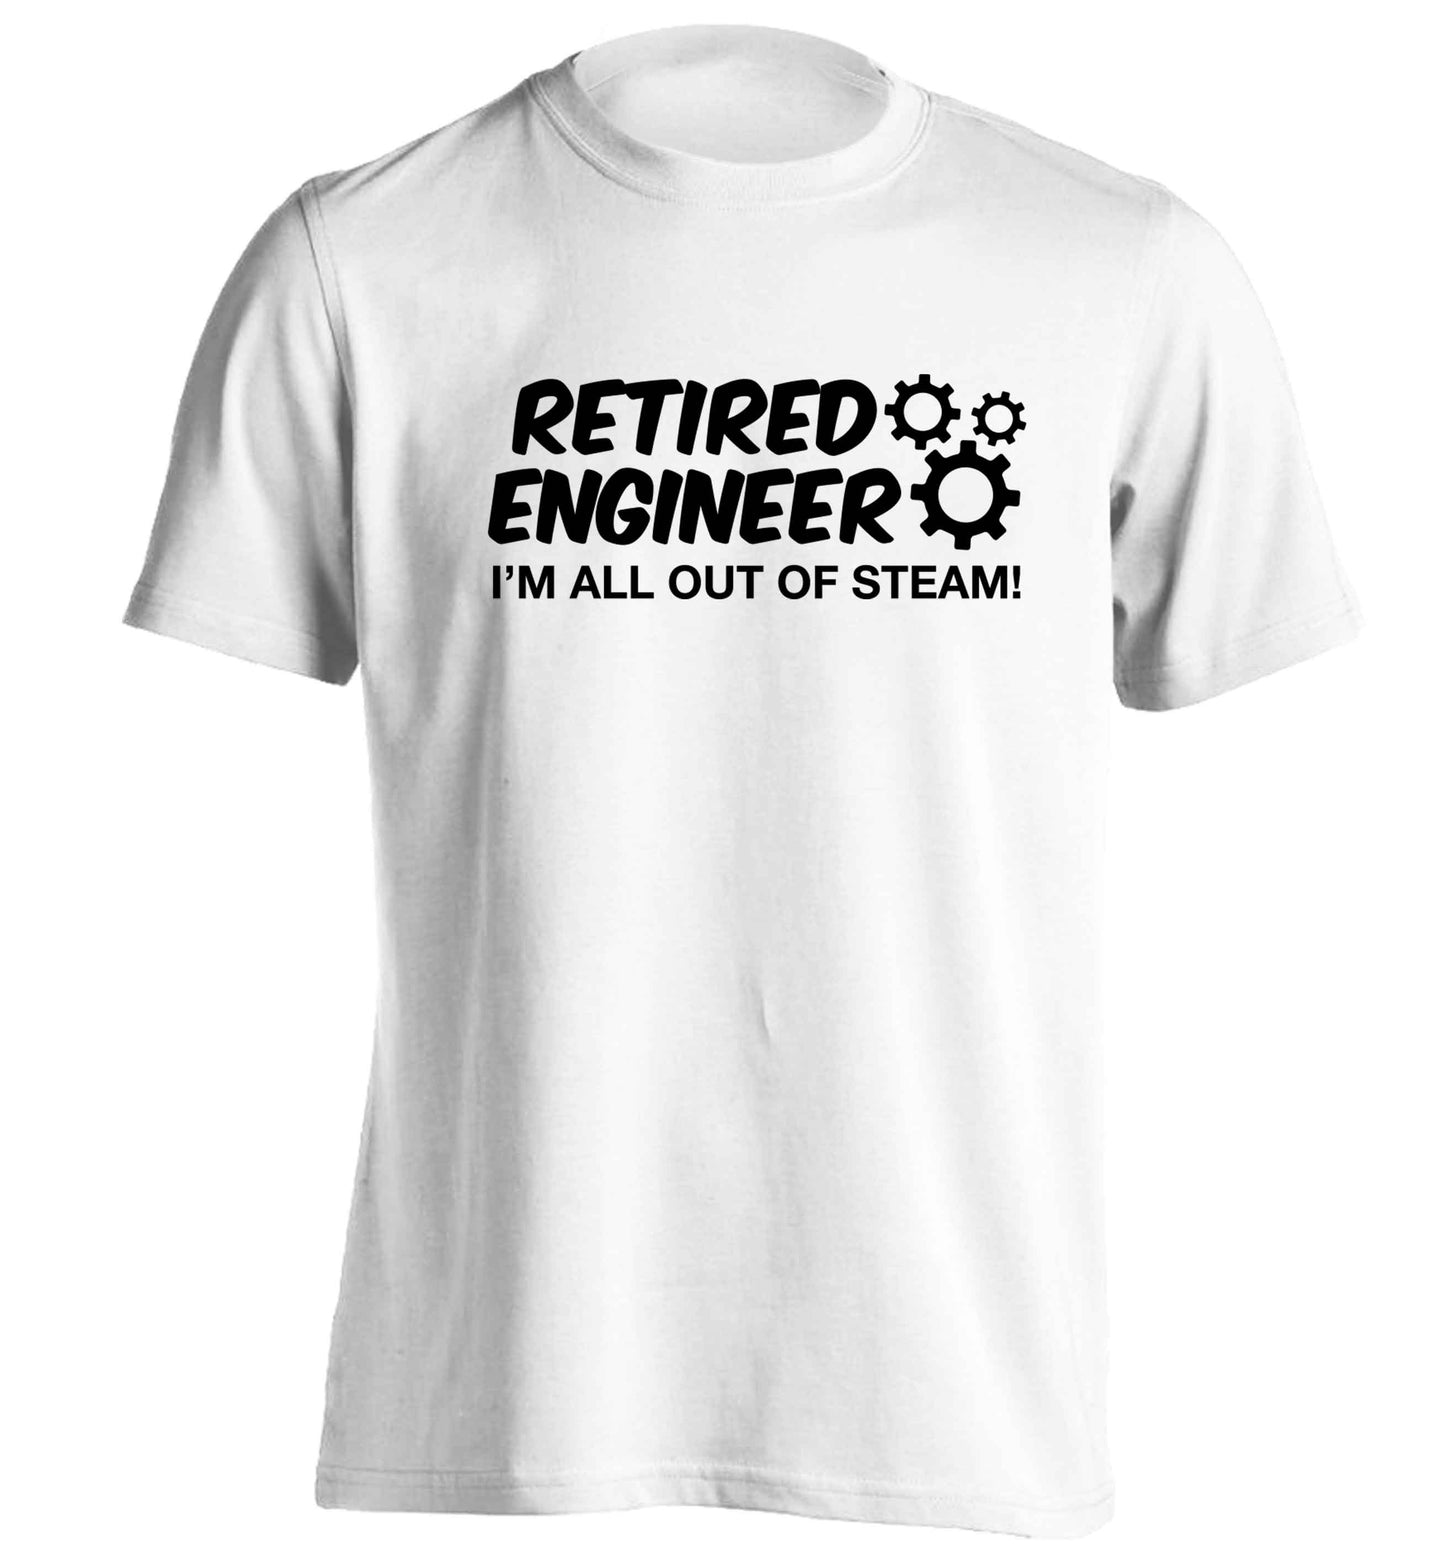 Retired engineer I'm all out of steam adults unisex white Tshirt 2XL